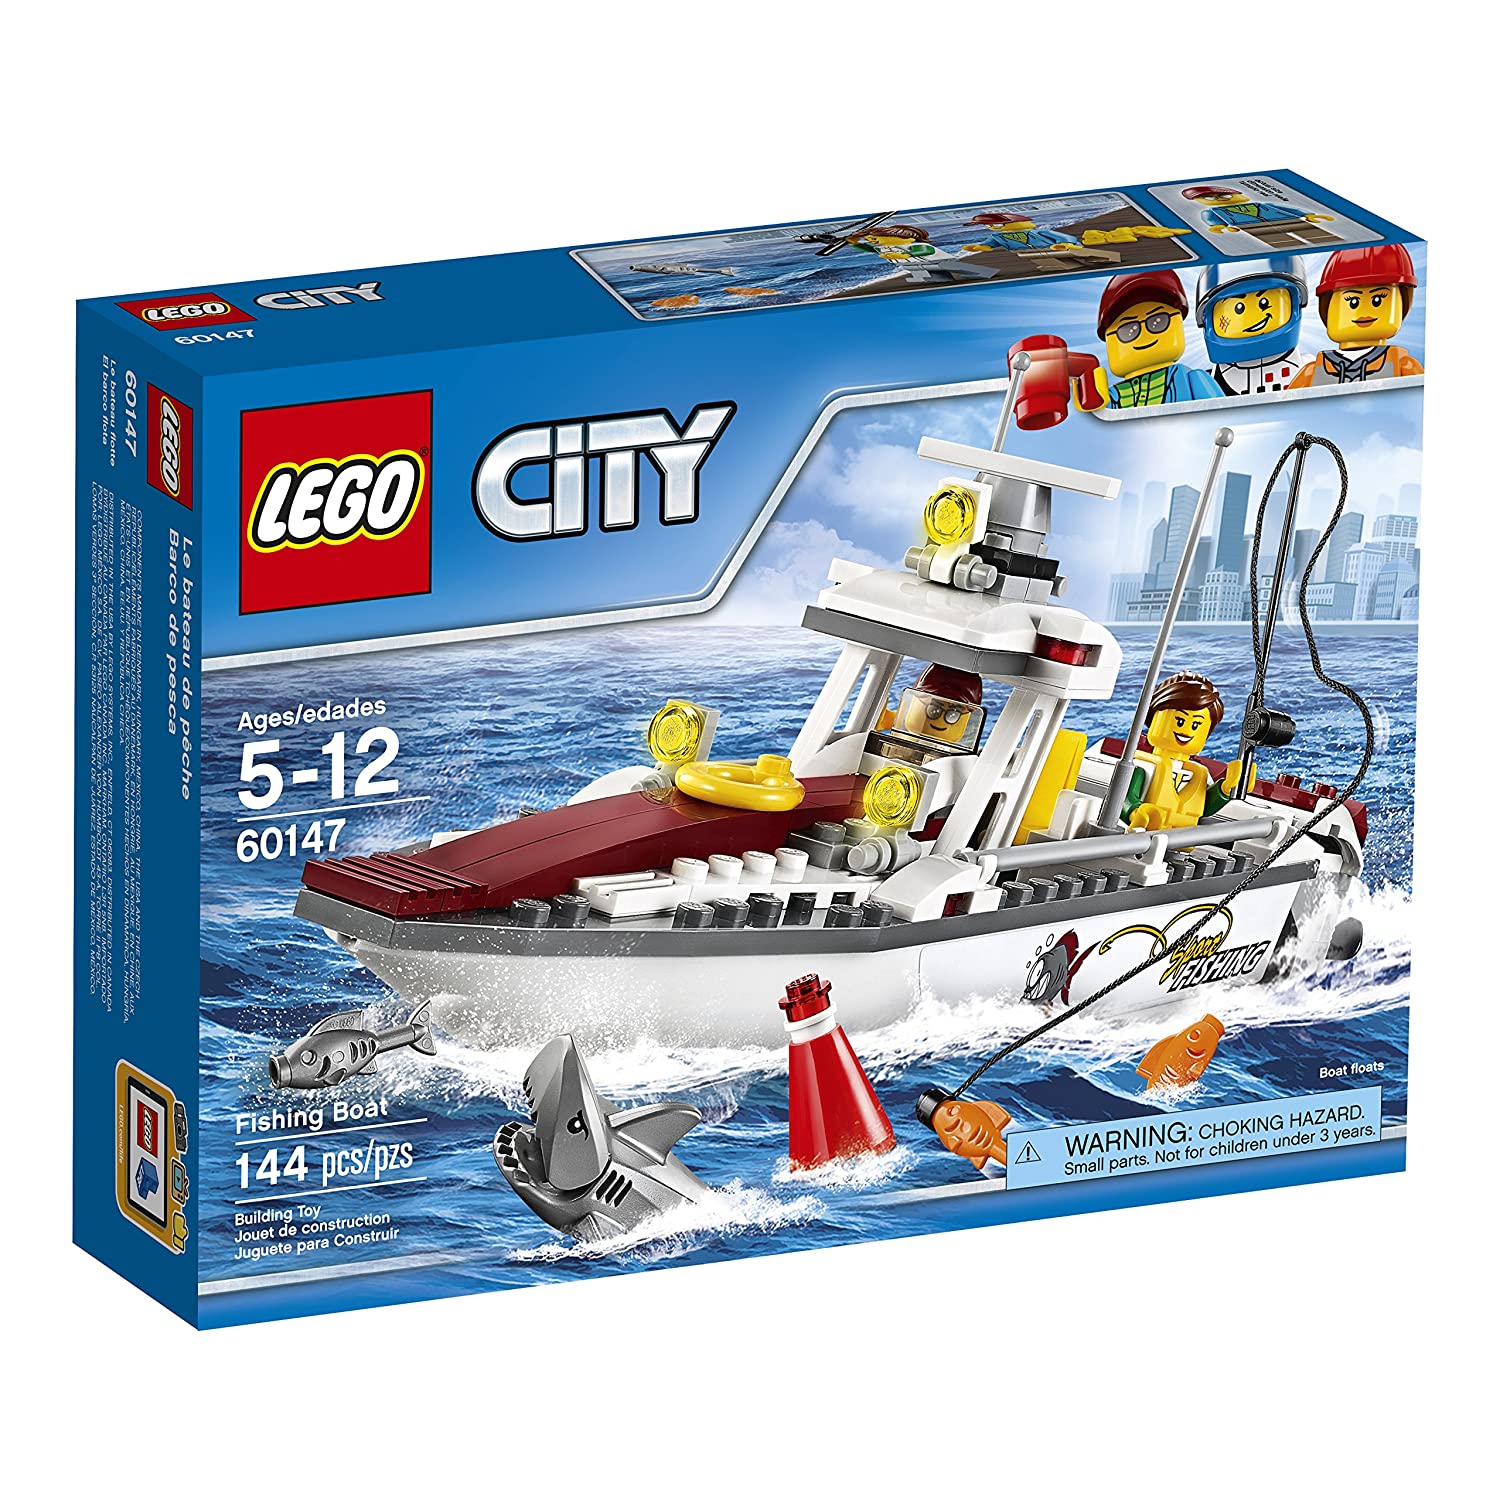 Top 9 Best LEGO Boat Sets Reviews in 2022 3